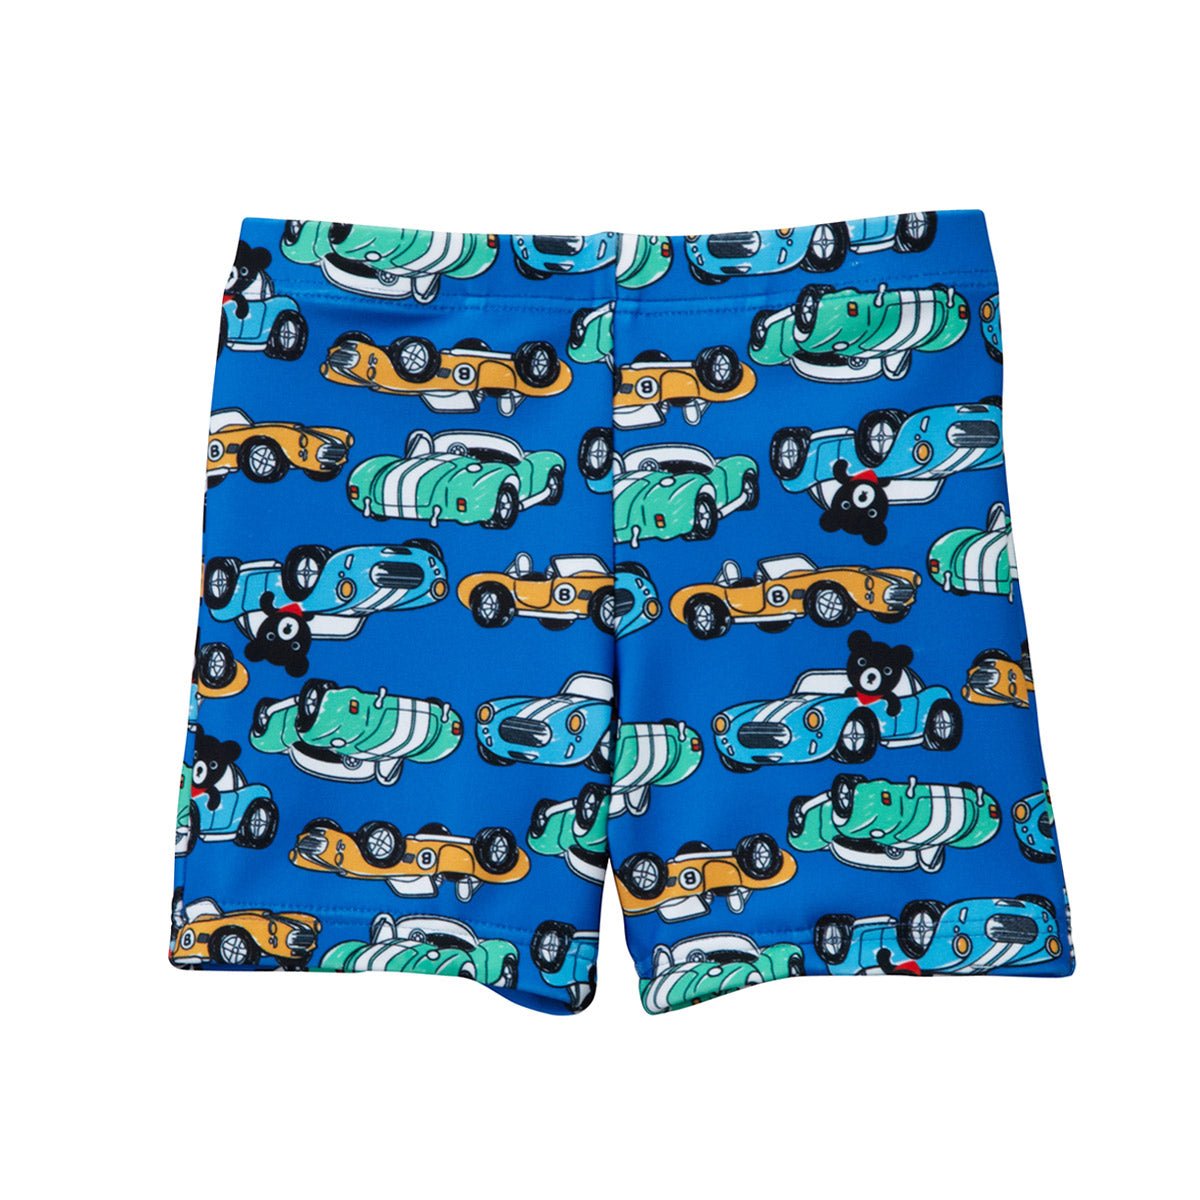 DOUBLE_B Sports Car Swimming Trunks (UV Protection) - 62-7101-612-15-80